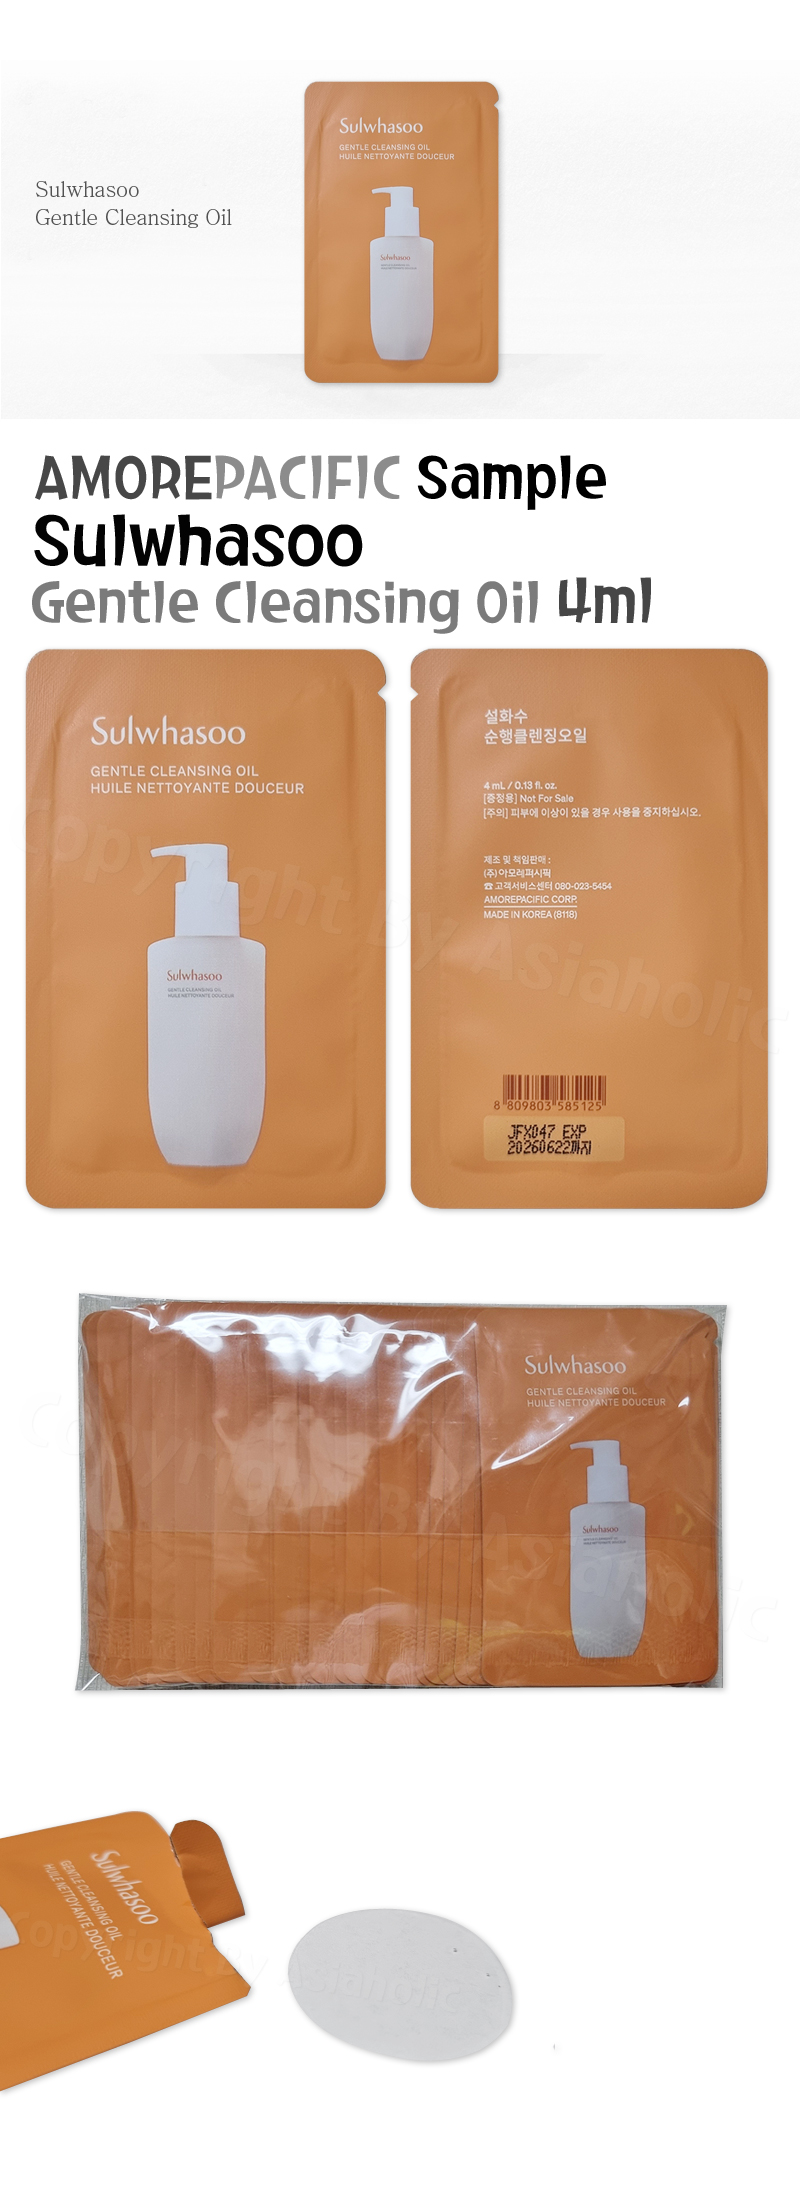 Sulwhasoo Gentle Cleansing Oil 4ml x 10pcs (40ml) Sample Newest Version